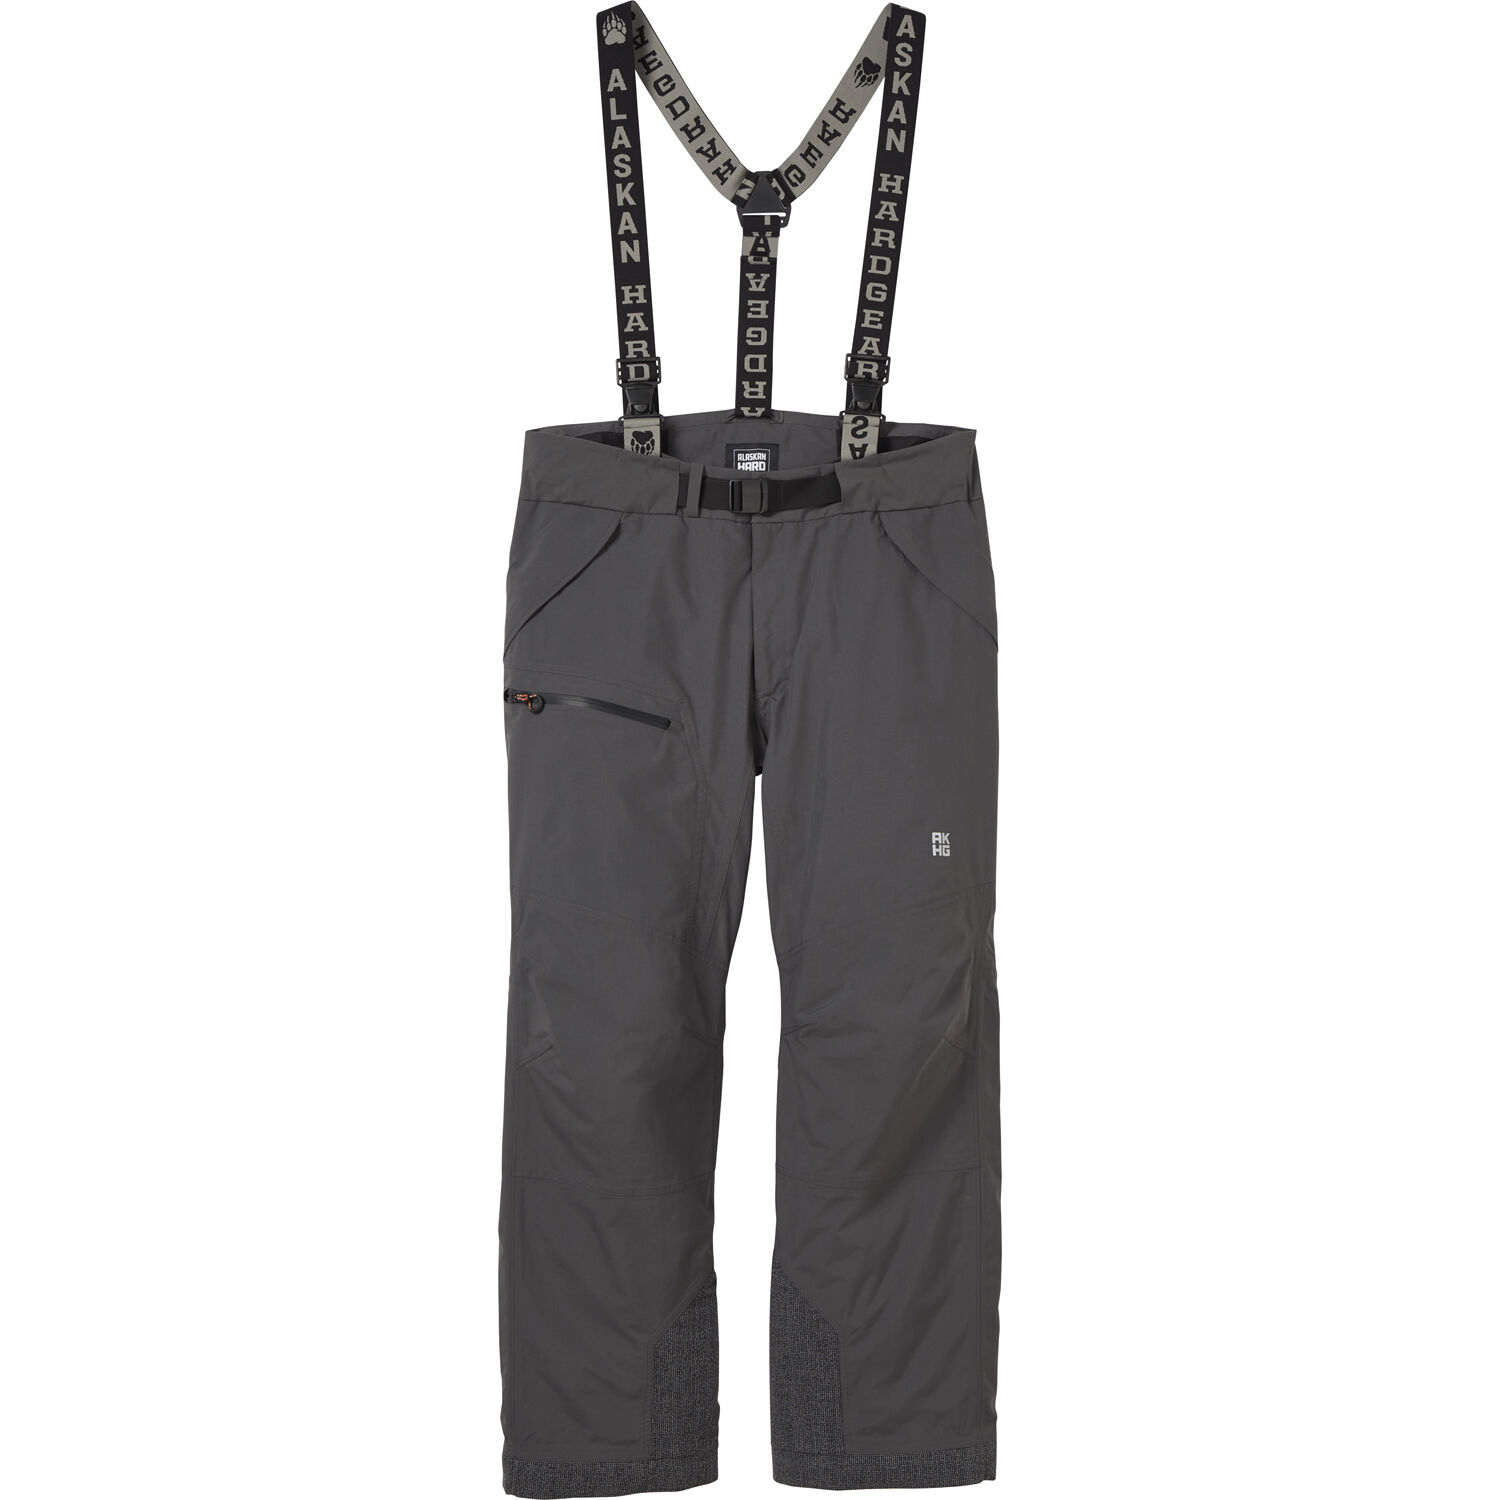 BUY XTIGER Thermal Snow Pants  Suspenders Version ON SALE NOW  Cheap  Snow Gear